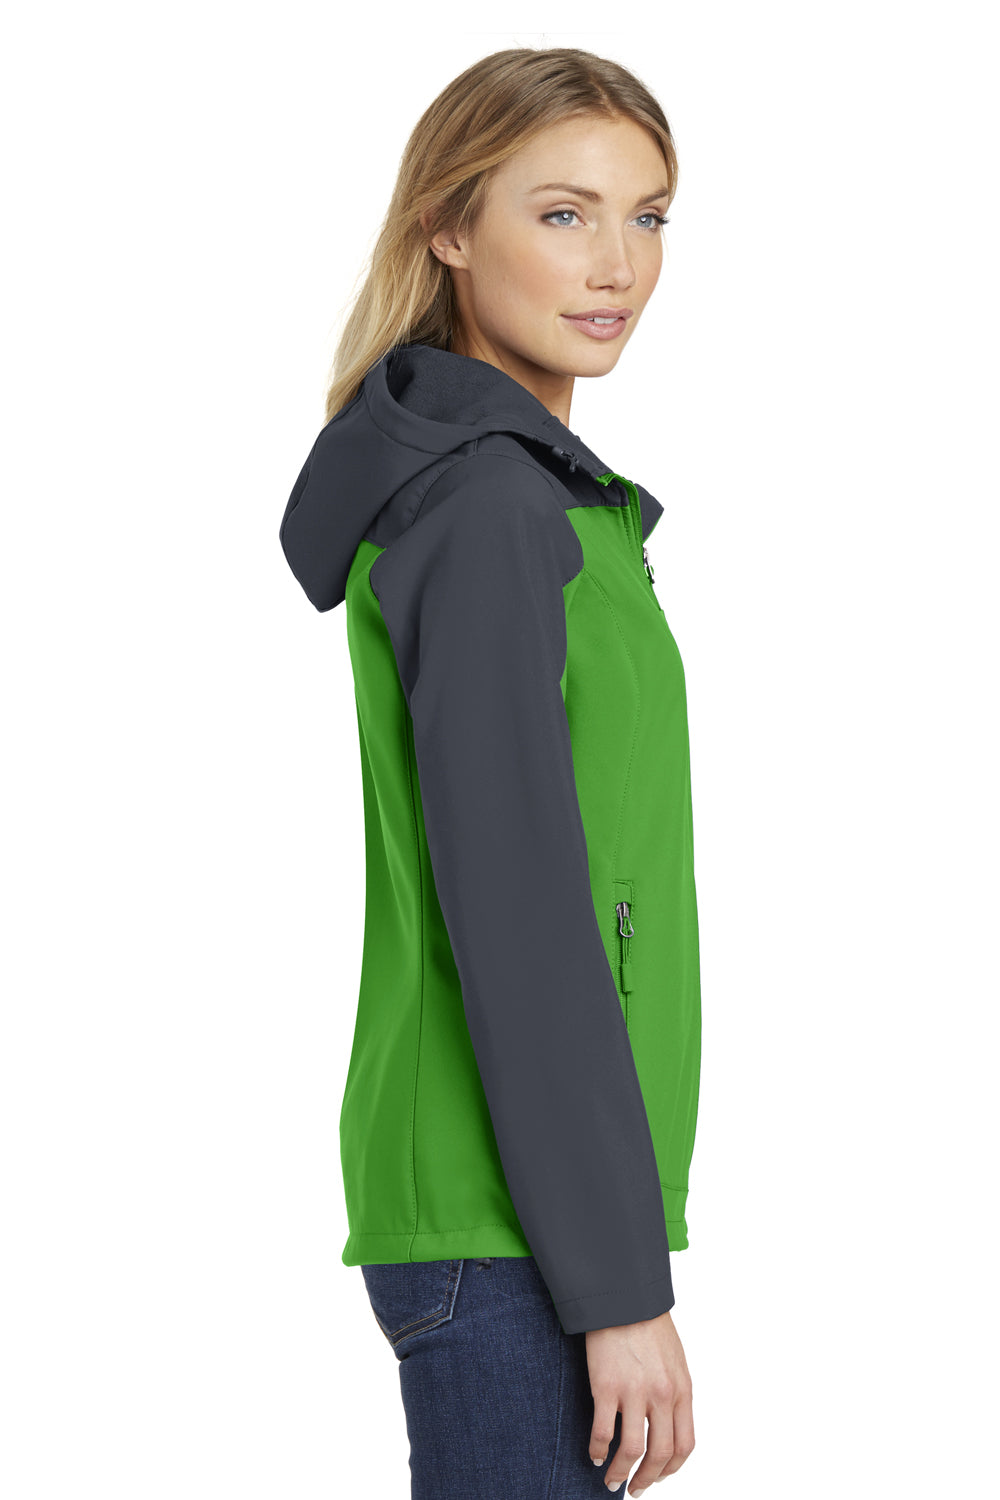 Port Authority L335 Womens Core Wind & Water Resistant Full Zip Hooded Jacket Green/Grey Side